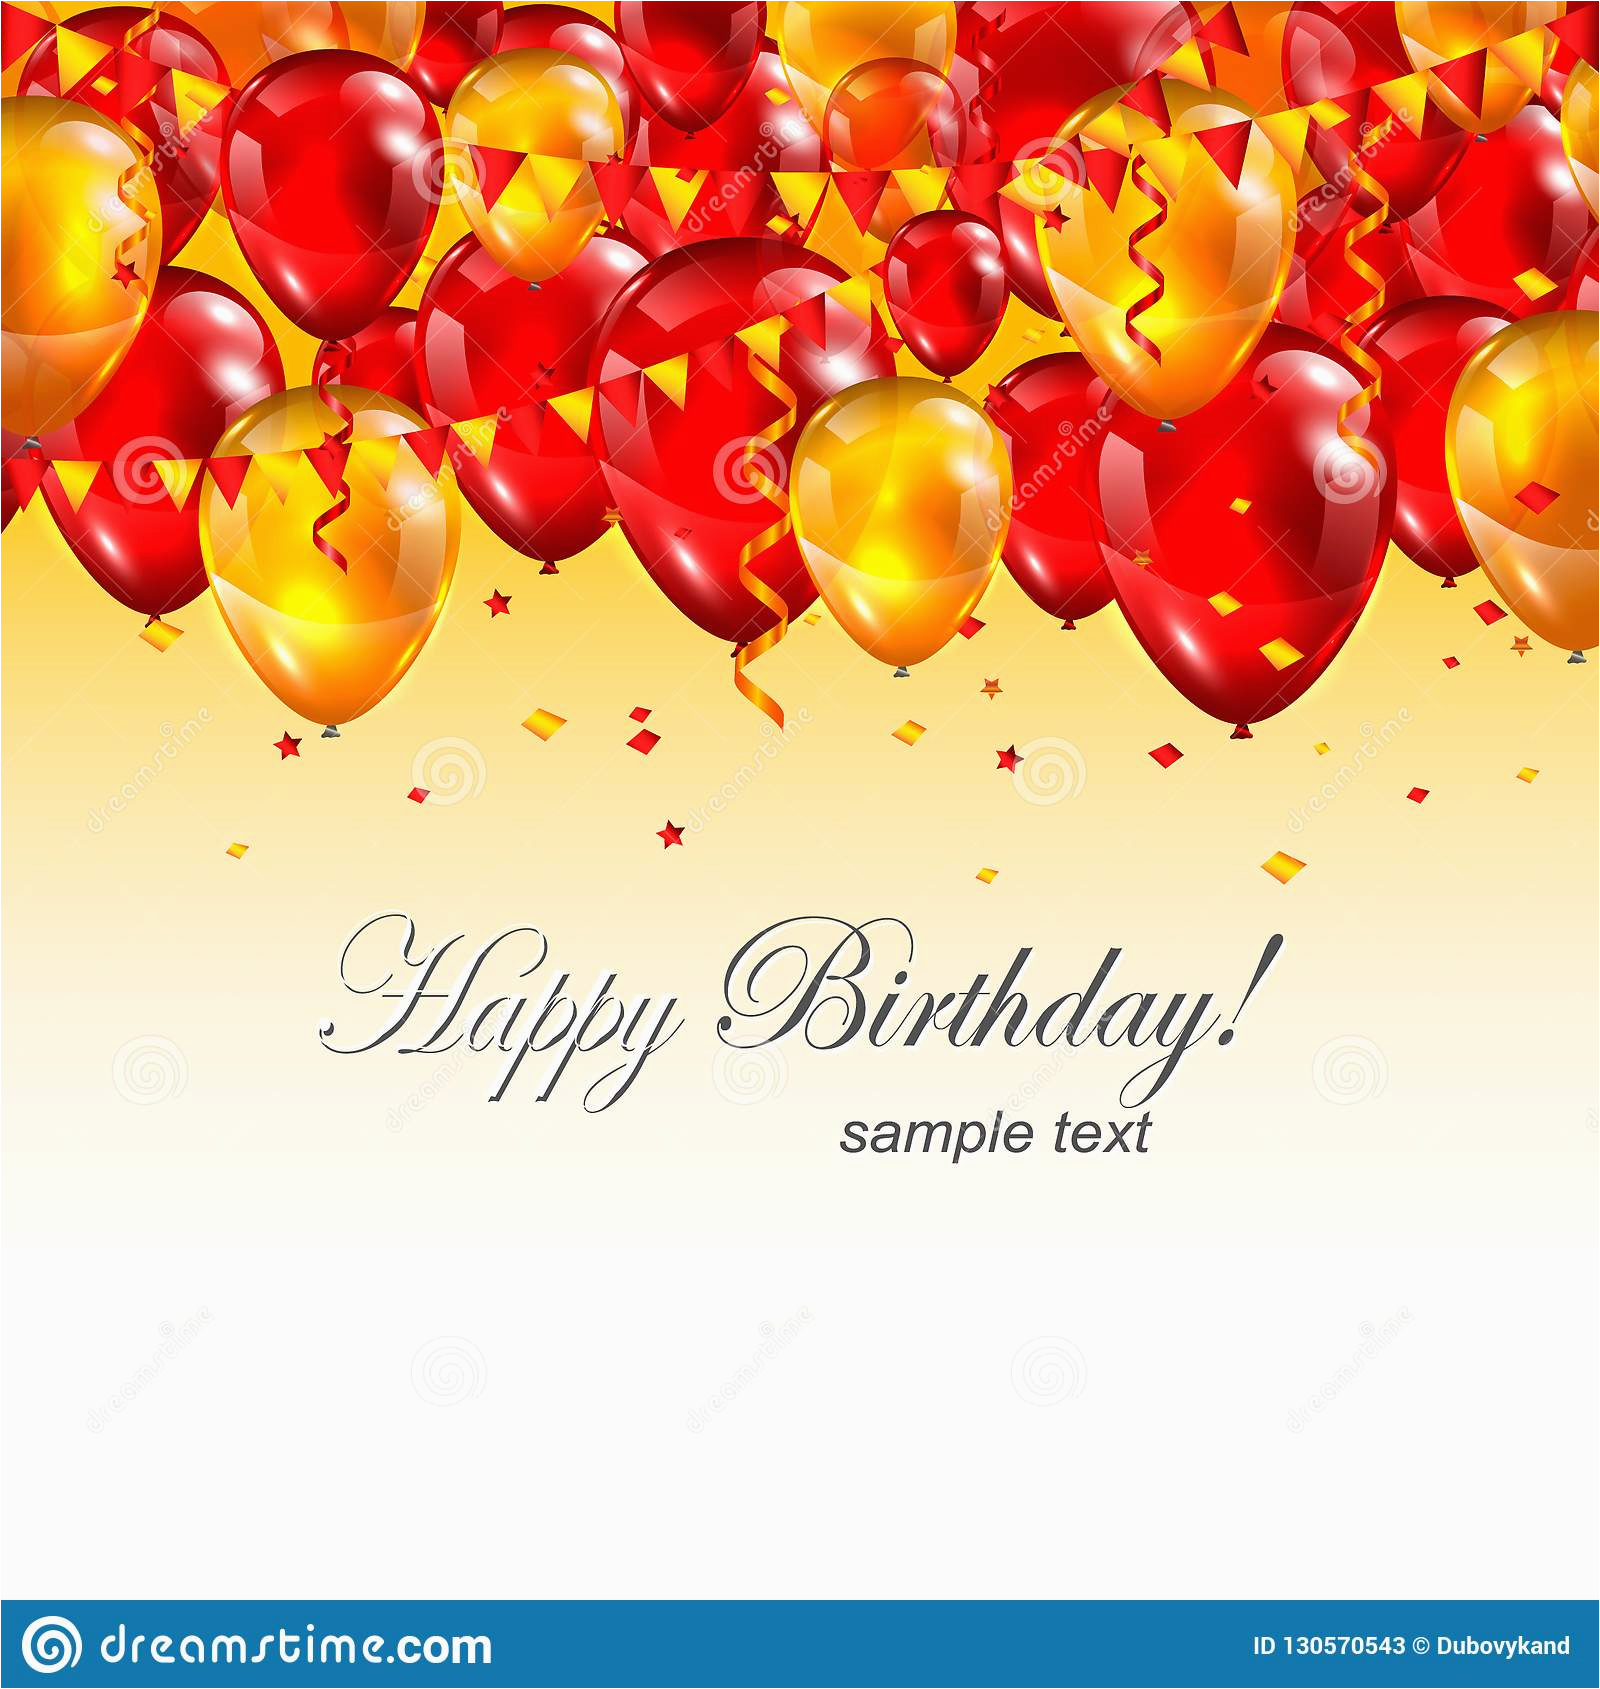 festive event banner realistic red yellow flying balloons serpentines confetti happy birthday text vector image130570543